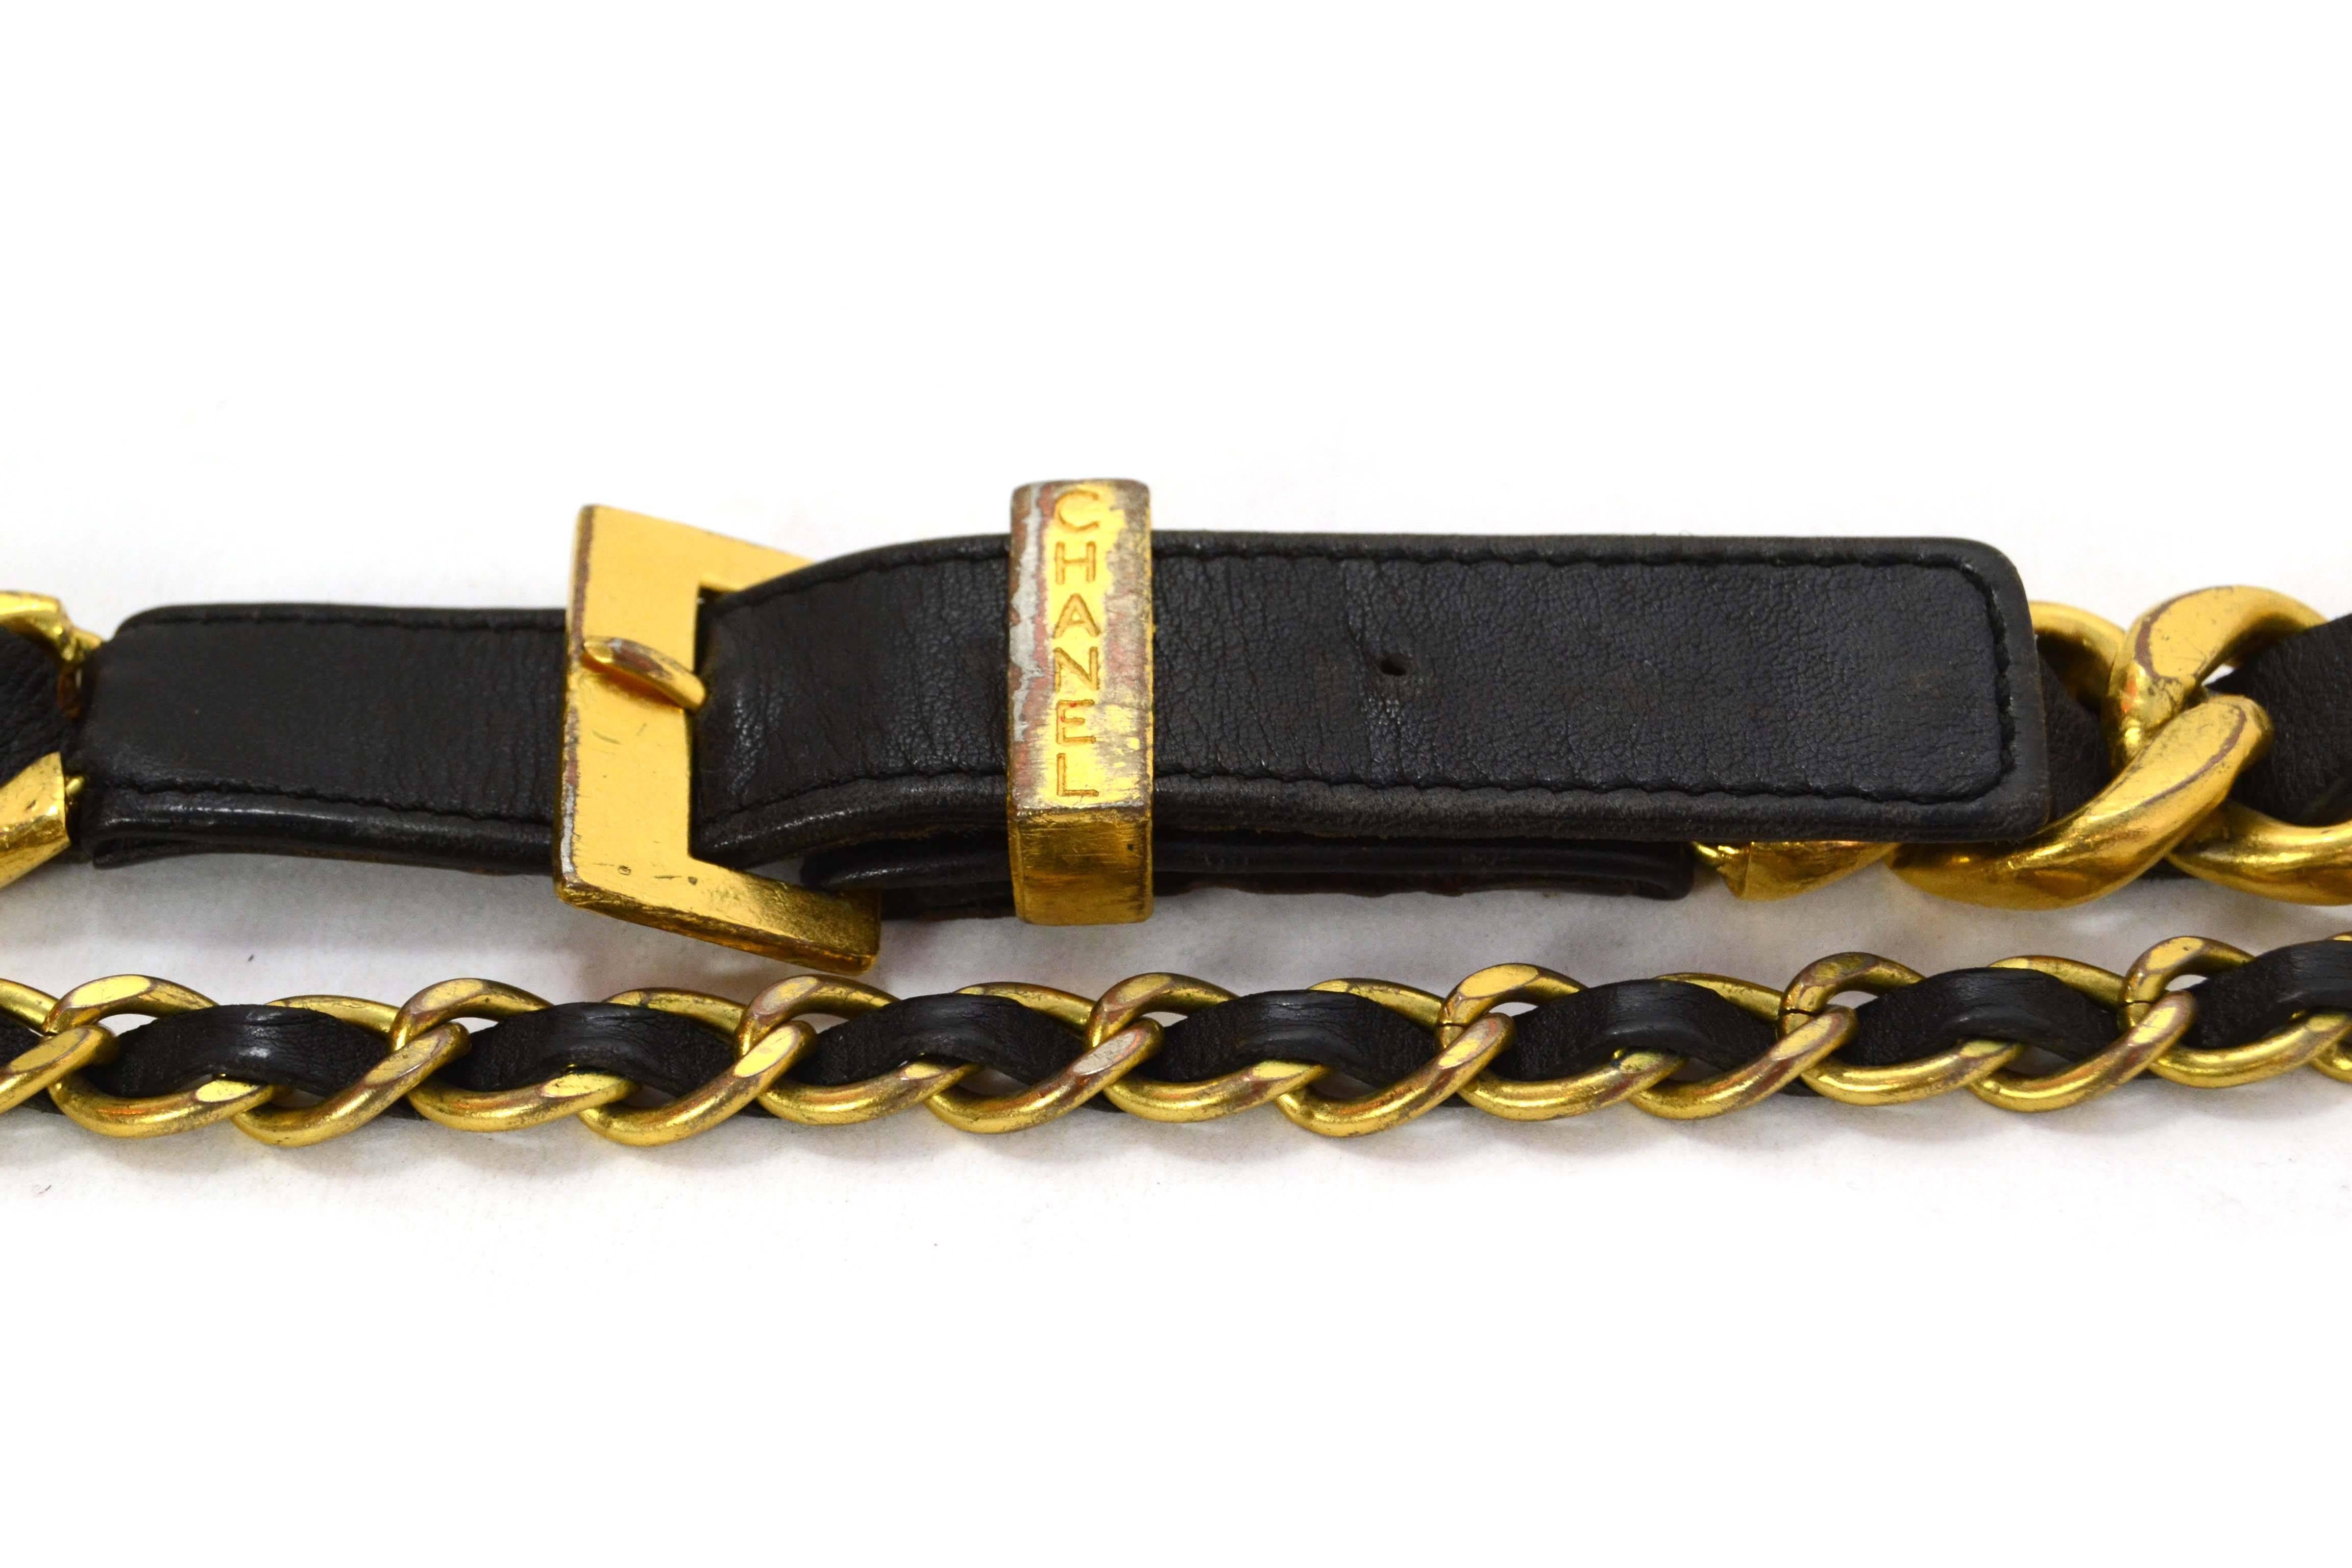 Chanel Vintage ’93 Leather Woven Chain Link Belt
Features small leather woven tier with four leaf clover charm
Made In: France
Year of Production: 1993
Color: Goldtone and black
Materials: Leather and metal
Closure: Buckle and notch closure